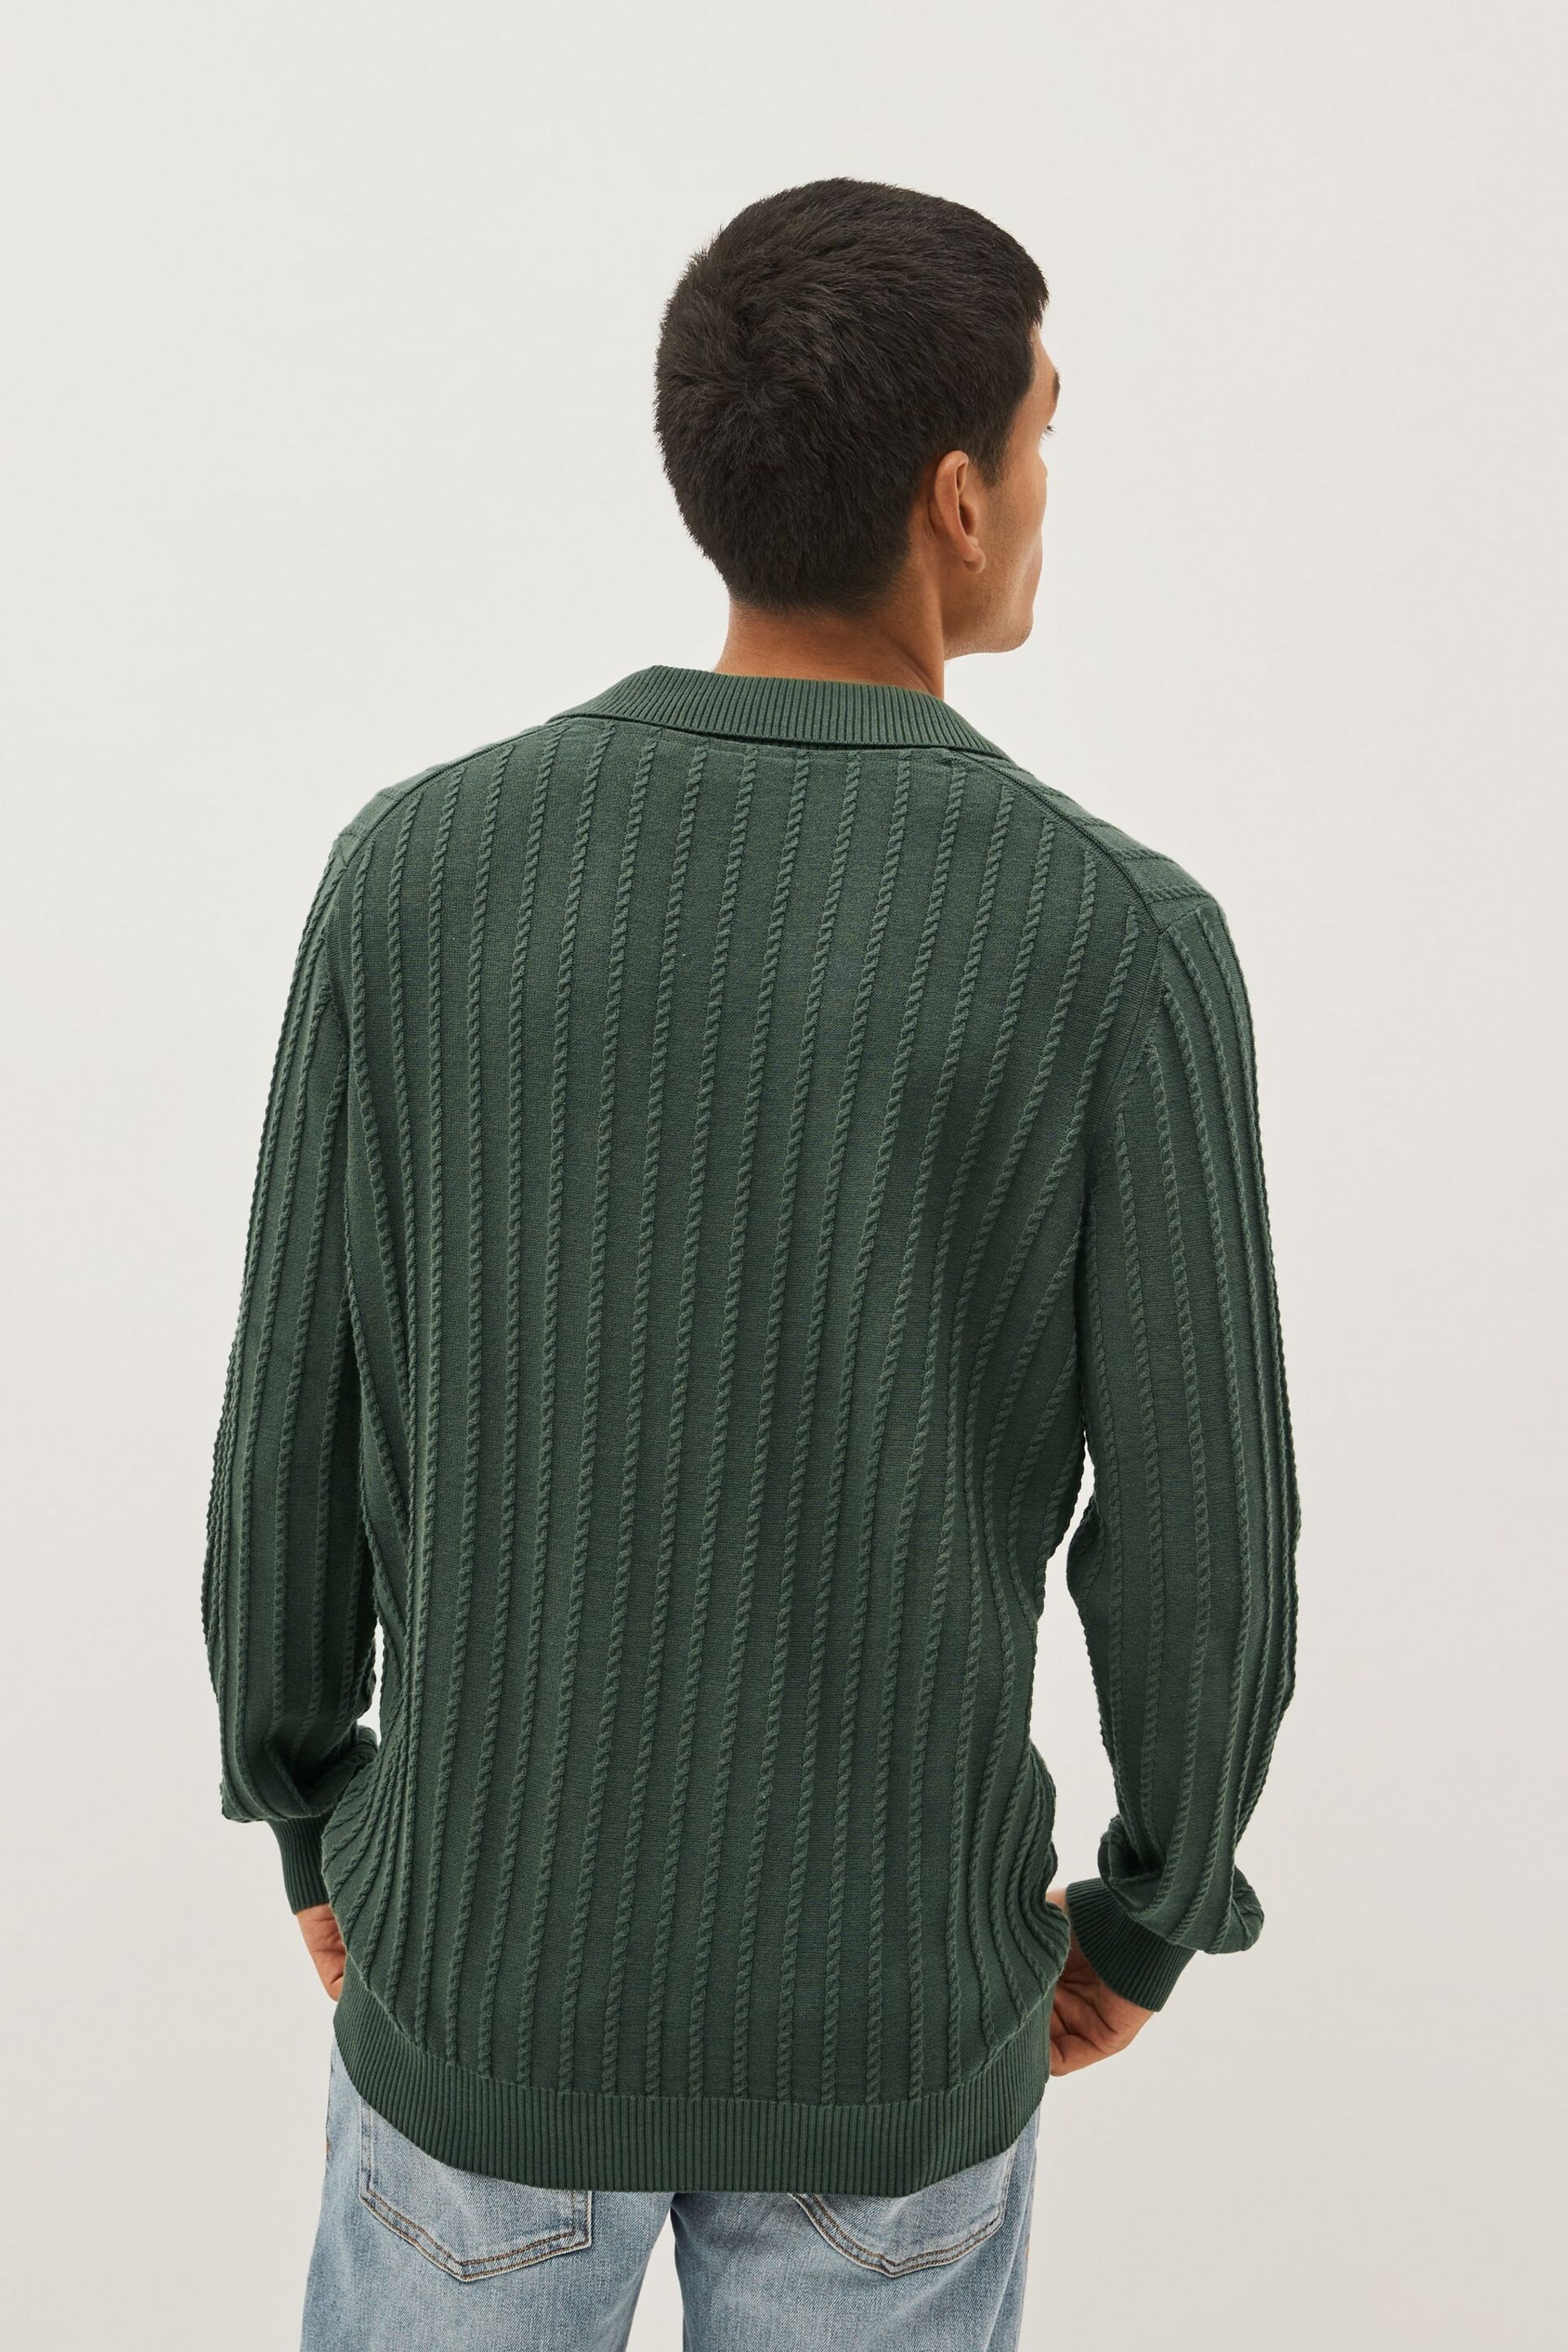 Lyle & Scott 1874 Vintage Cable Knitted Polo Jumper - Image 2 of 5